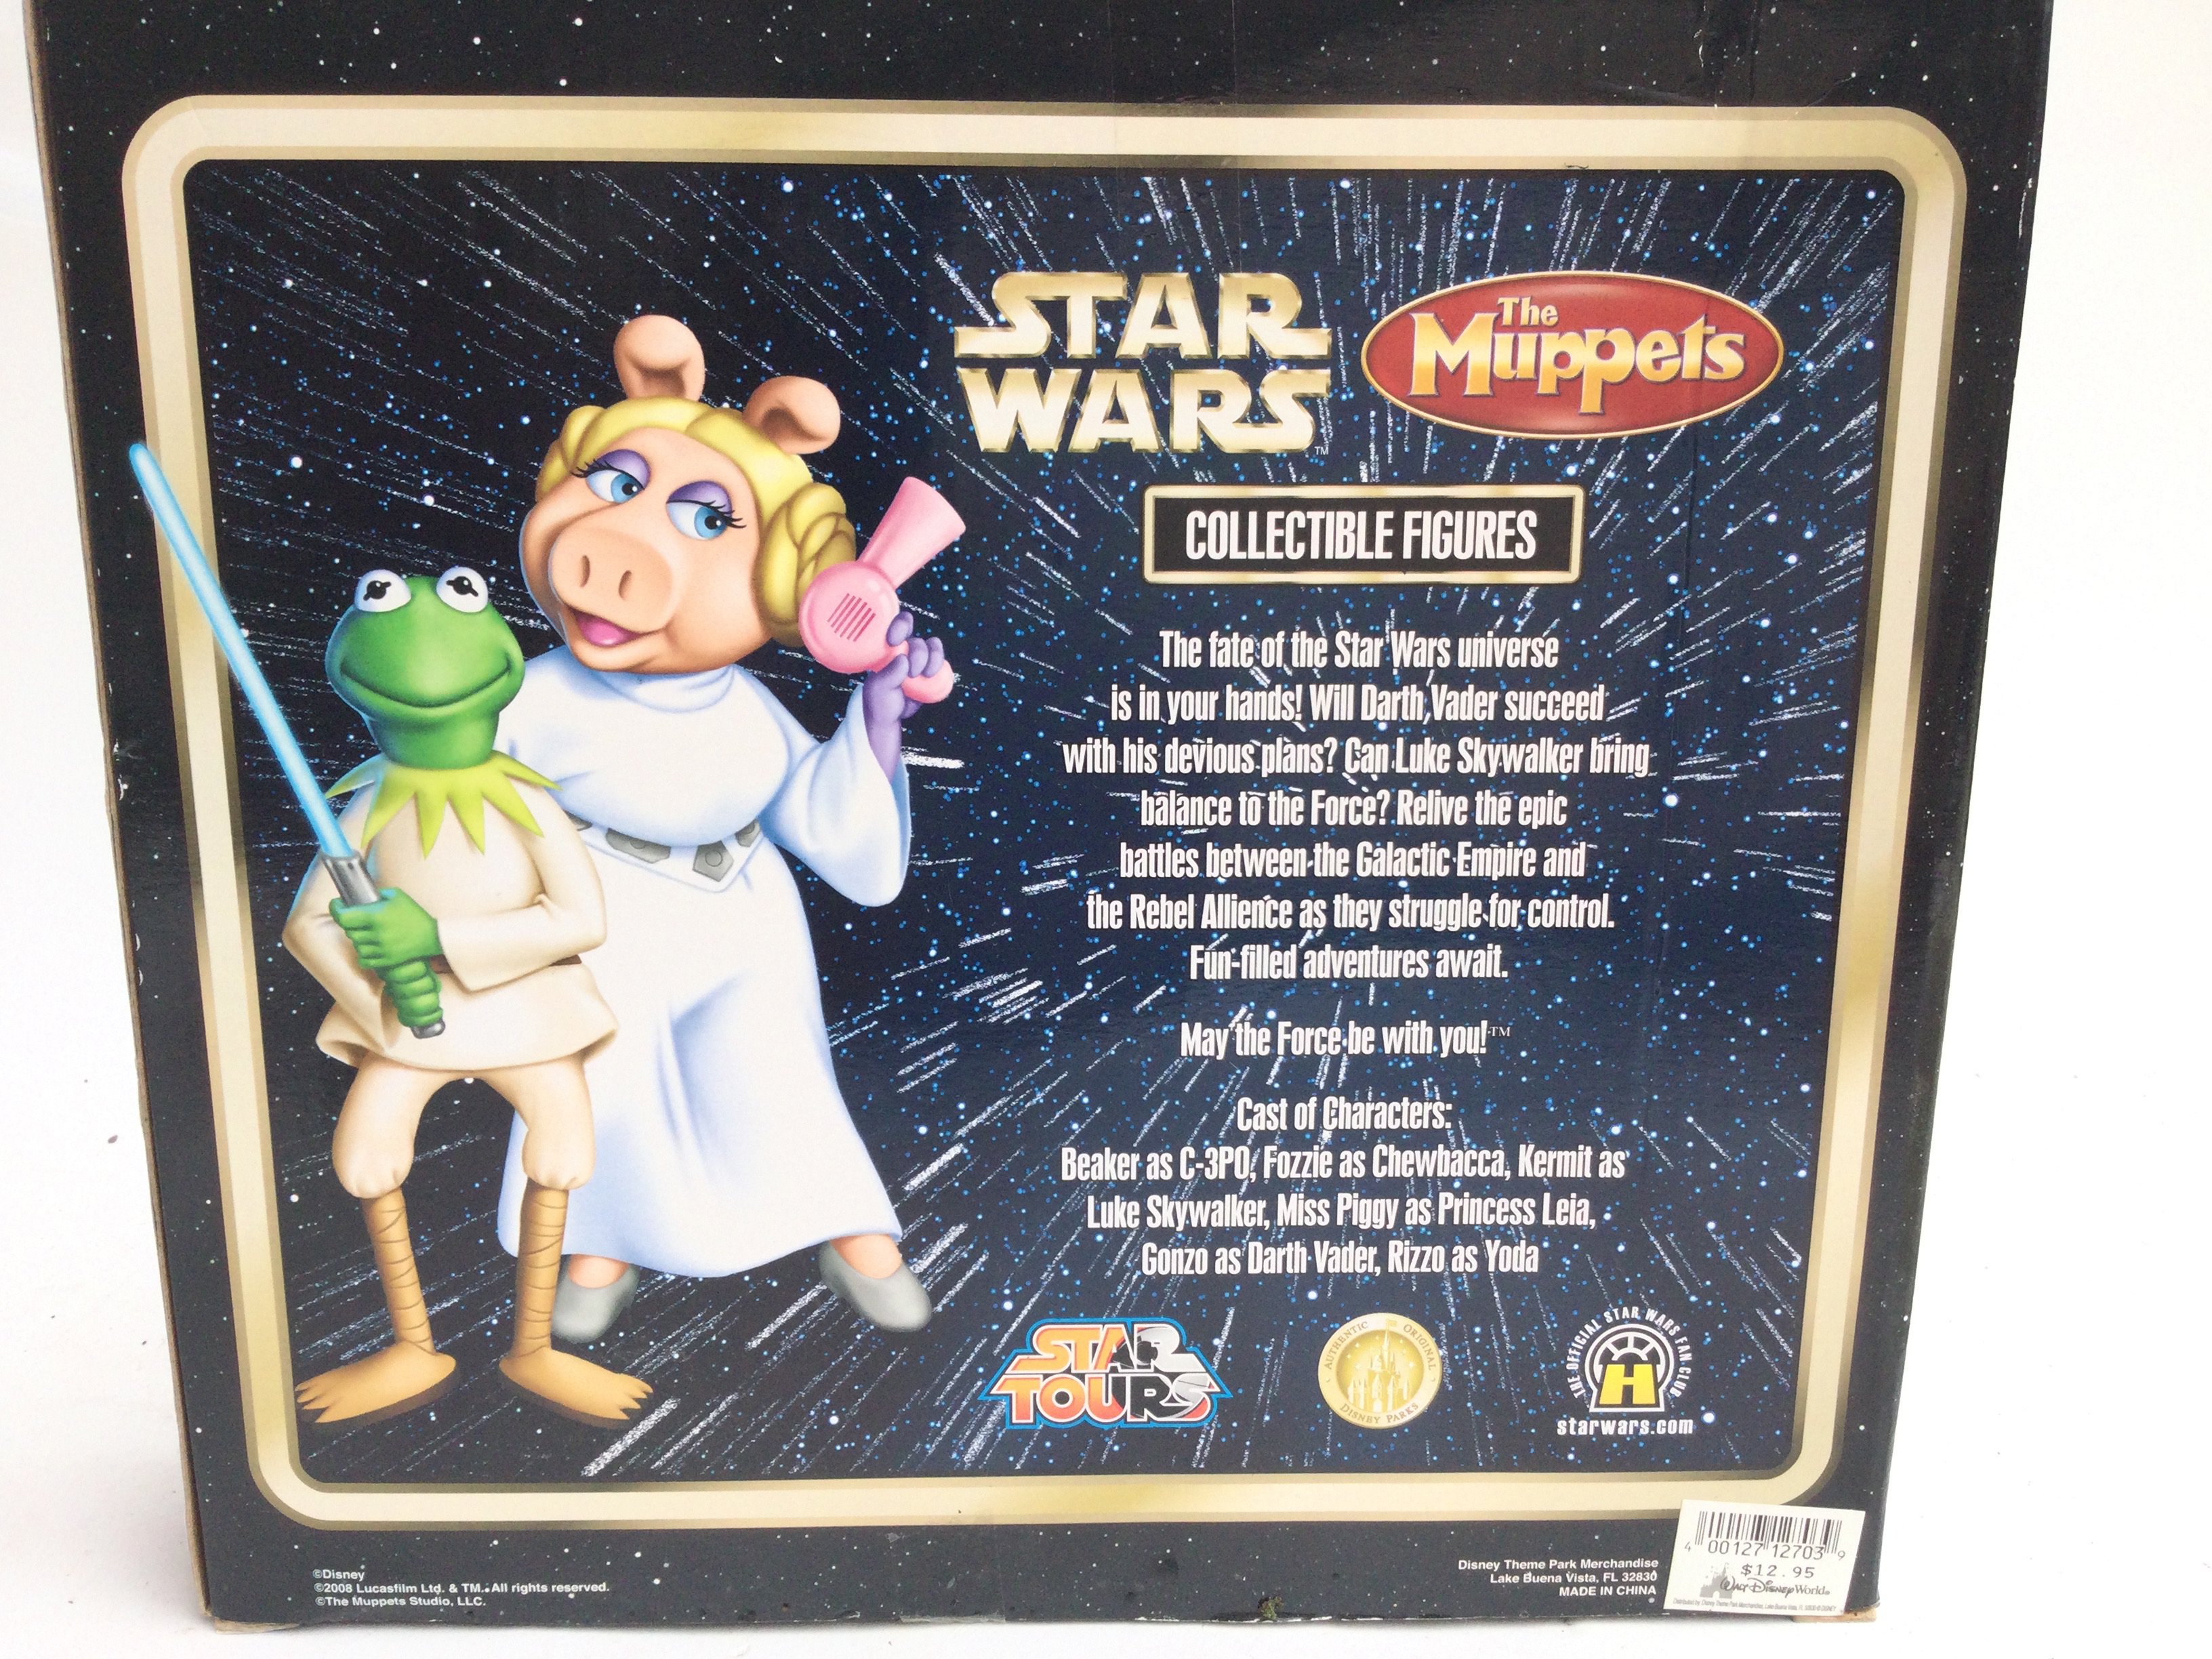 A Boxed Disney Star Wars Star Tours The Muppets Se - Image 2 of 2